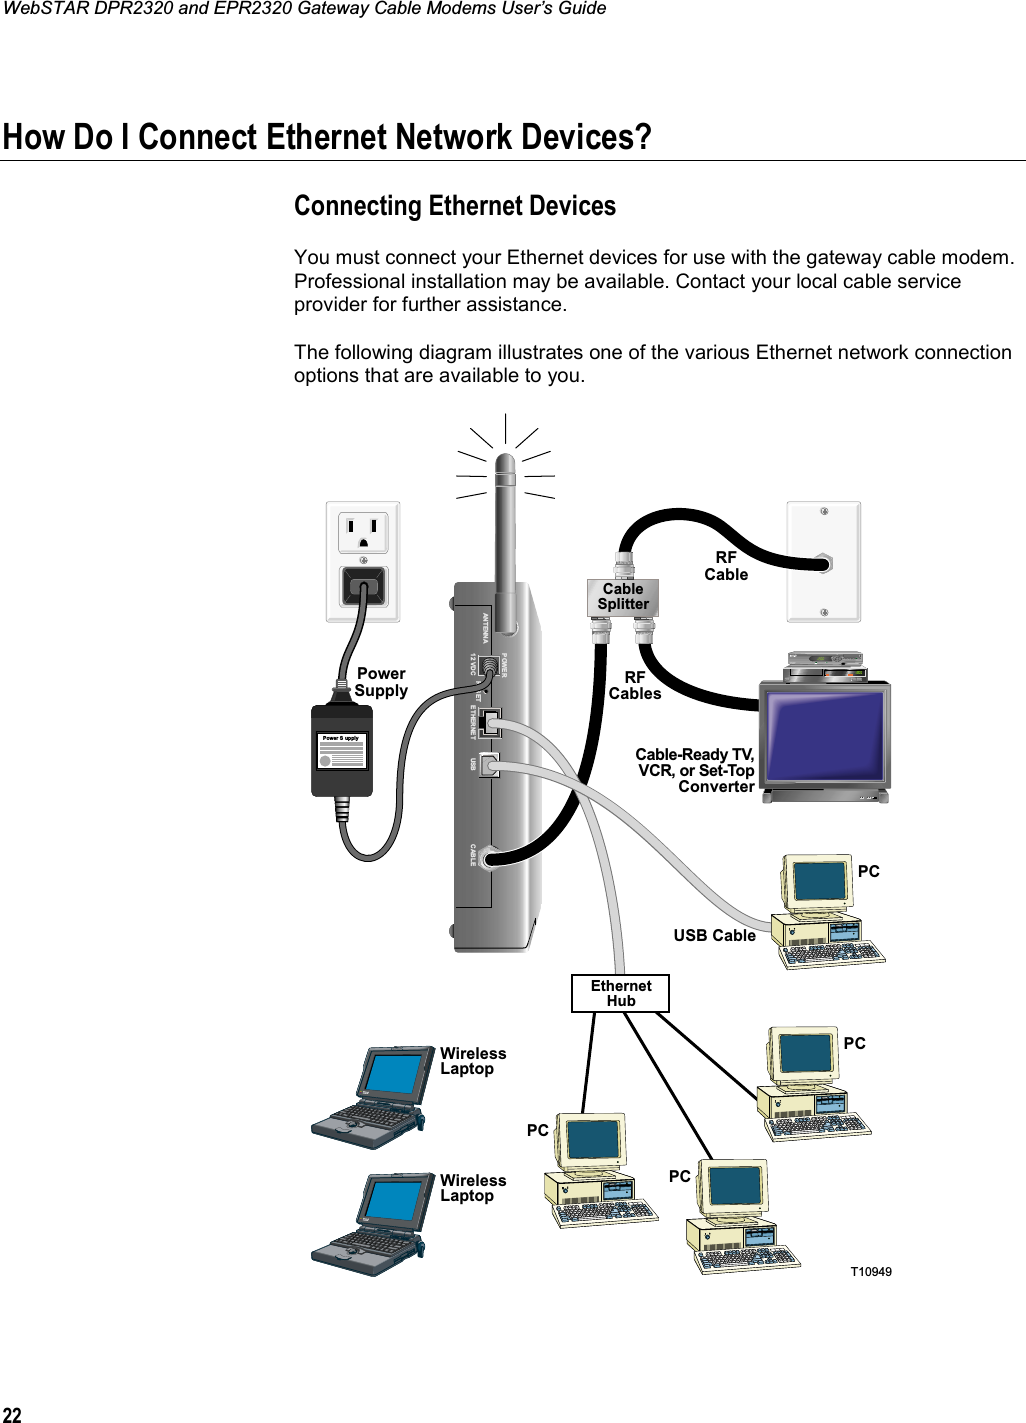 WebSTAR DPR2320 and EPR2320 Gateway Cable Modems User’s Guide 22How Do I Connect Ethernet Network Devices?Connecting Ethernet Devices You must connect your Ethernet devices for use with the gateway cable modem. Professional installation may be available. Contact your local cable service provider for further assistance. The following diagram illustrates one of the various Ethernet network connection options that are available to you. POWERANTENNA12 VDC RESET ETHERNET CABLEUSBPowerSupplyCable-Ready TV, VCR, or Set-TopConverterPCUSB CableRFCableRFCablesCableSplitterT10949Power SupplyBYPASSVOLñVOL+CH+CHñMENU GUIDE INFO A/B POWEREthernetHubPCPCWirelessLaptopPCWirelessLaptop